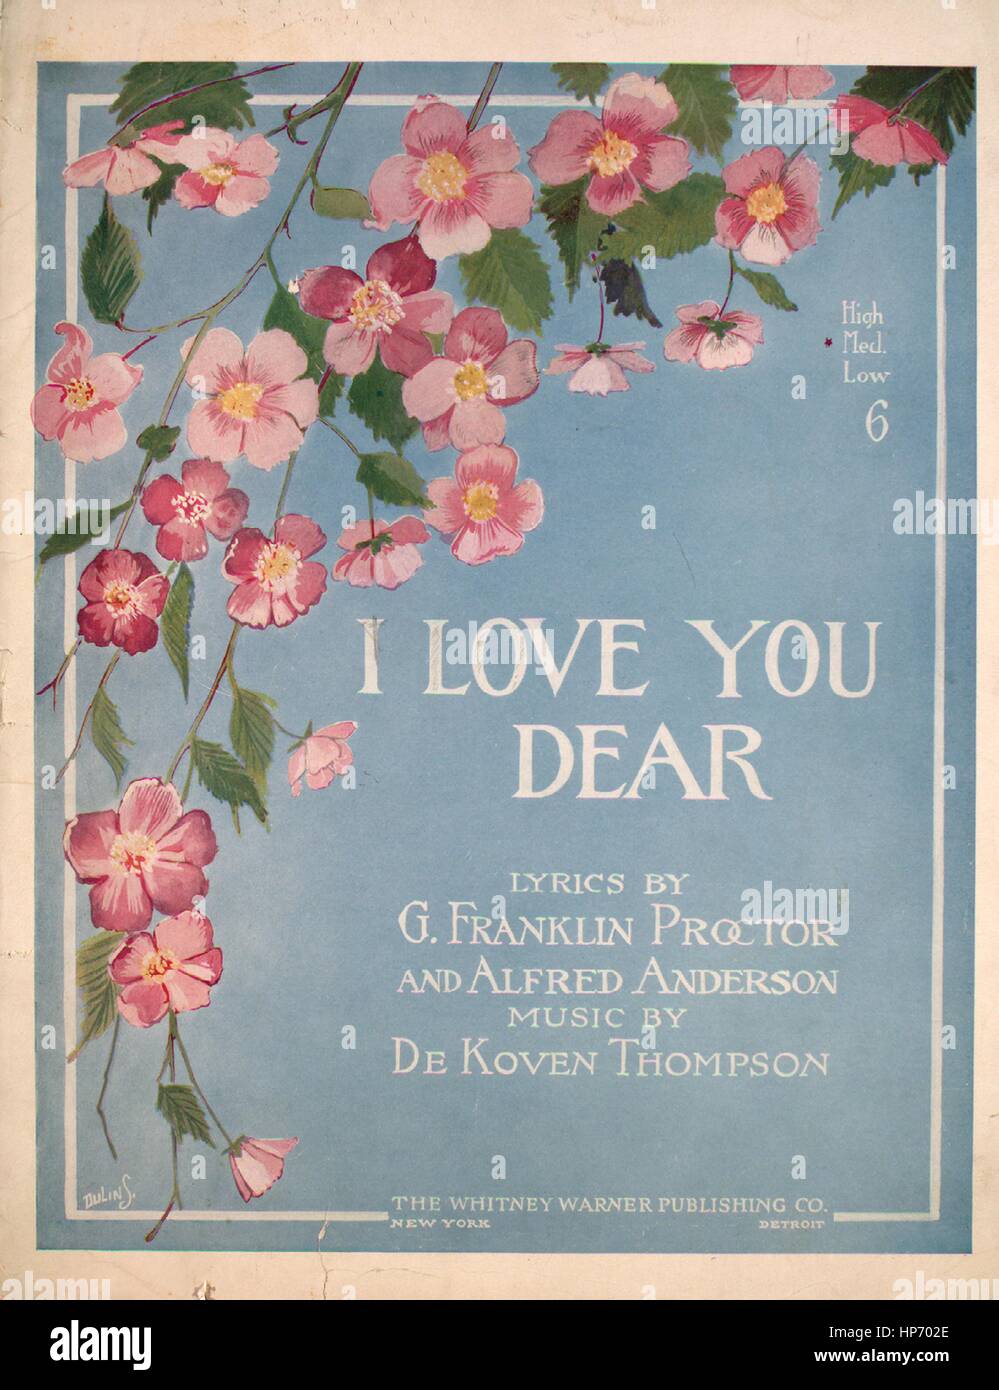 Sheet music cover image of the song 'I Love You Dear', with original authorship notes reading 'Lyrics by G Franklin Proctor and Alfred Anderson Music by De Koven Thompson', United States, 1915. The publisher is listed as 'The Whitney Warner Publishing Co.', the form of composition is 'strophic', the instrumentation is 'piano and voice', the first line reads 'I love you, dear, I truly do', and the illustration artist is listed as 'Dulins'. Stock Photo